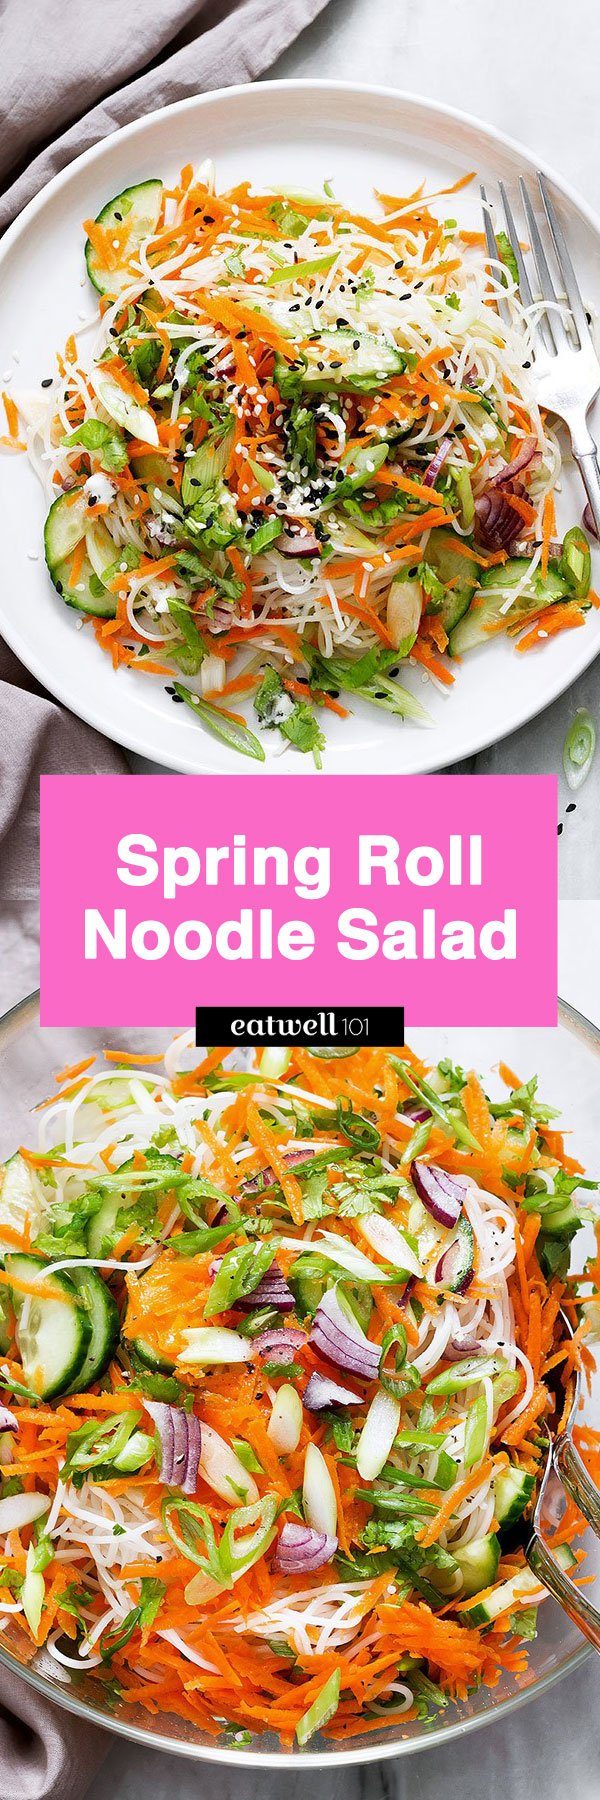 Spring Roll Noodle Salad Recipe - #noodle #salad #recipe #eatwell101 - A light, bright noodle salad packed with protein and vitamins and perfect for spring nights. 